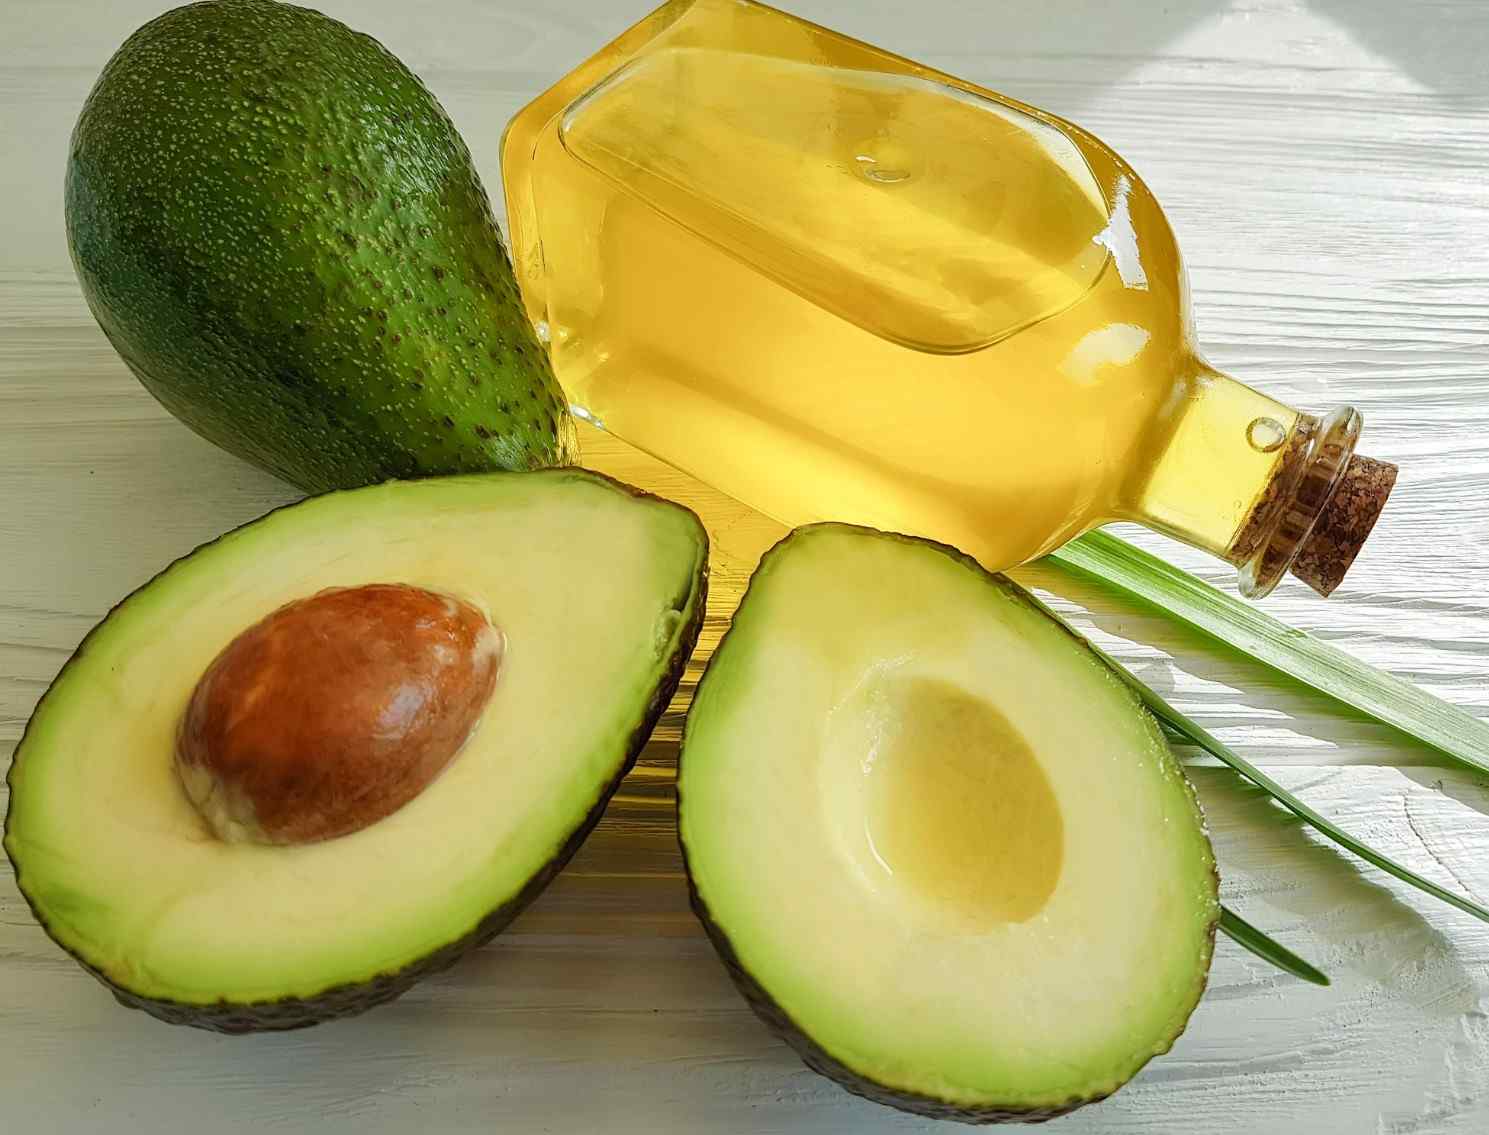 Uses and Benefits of Avocado Oil